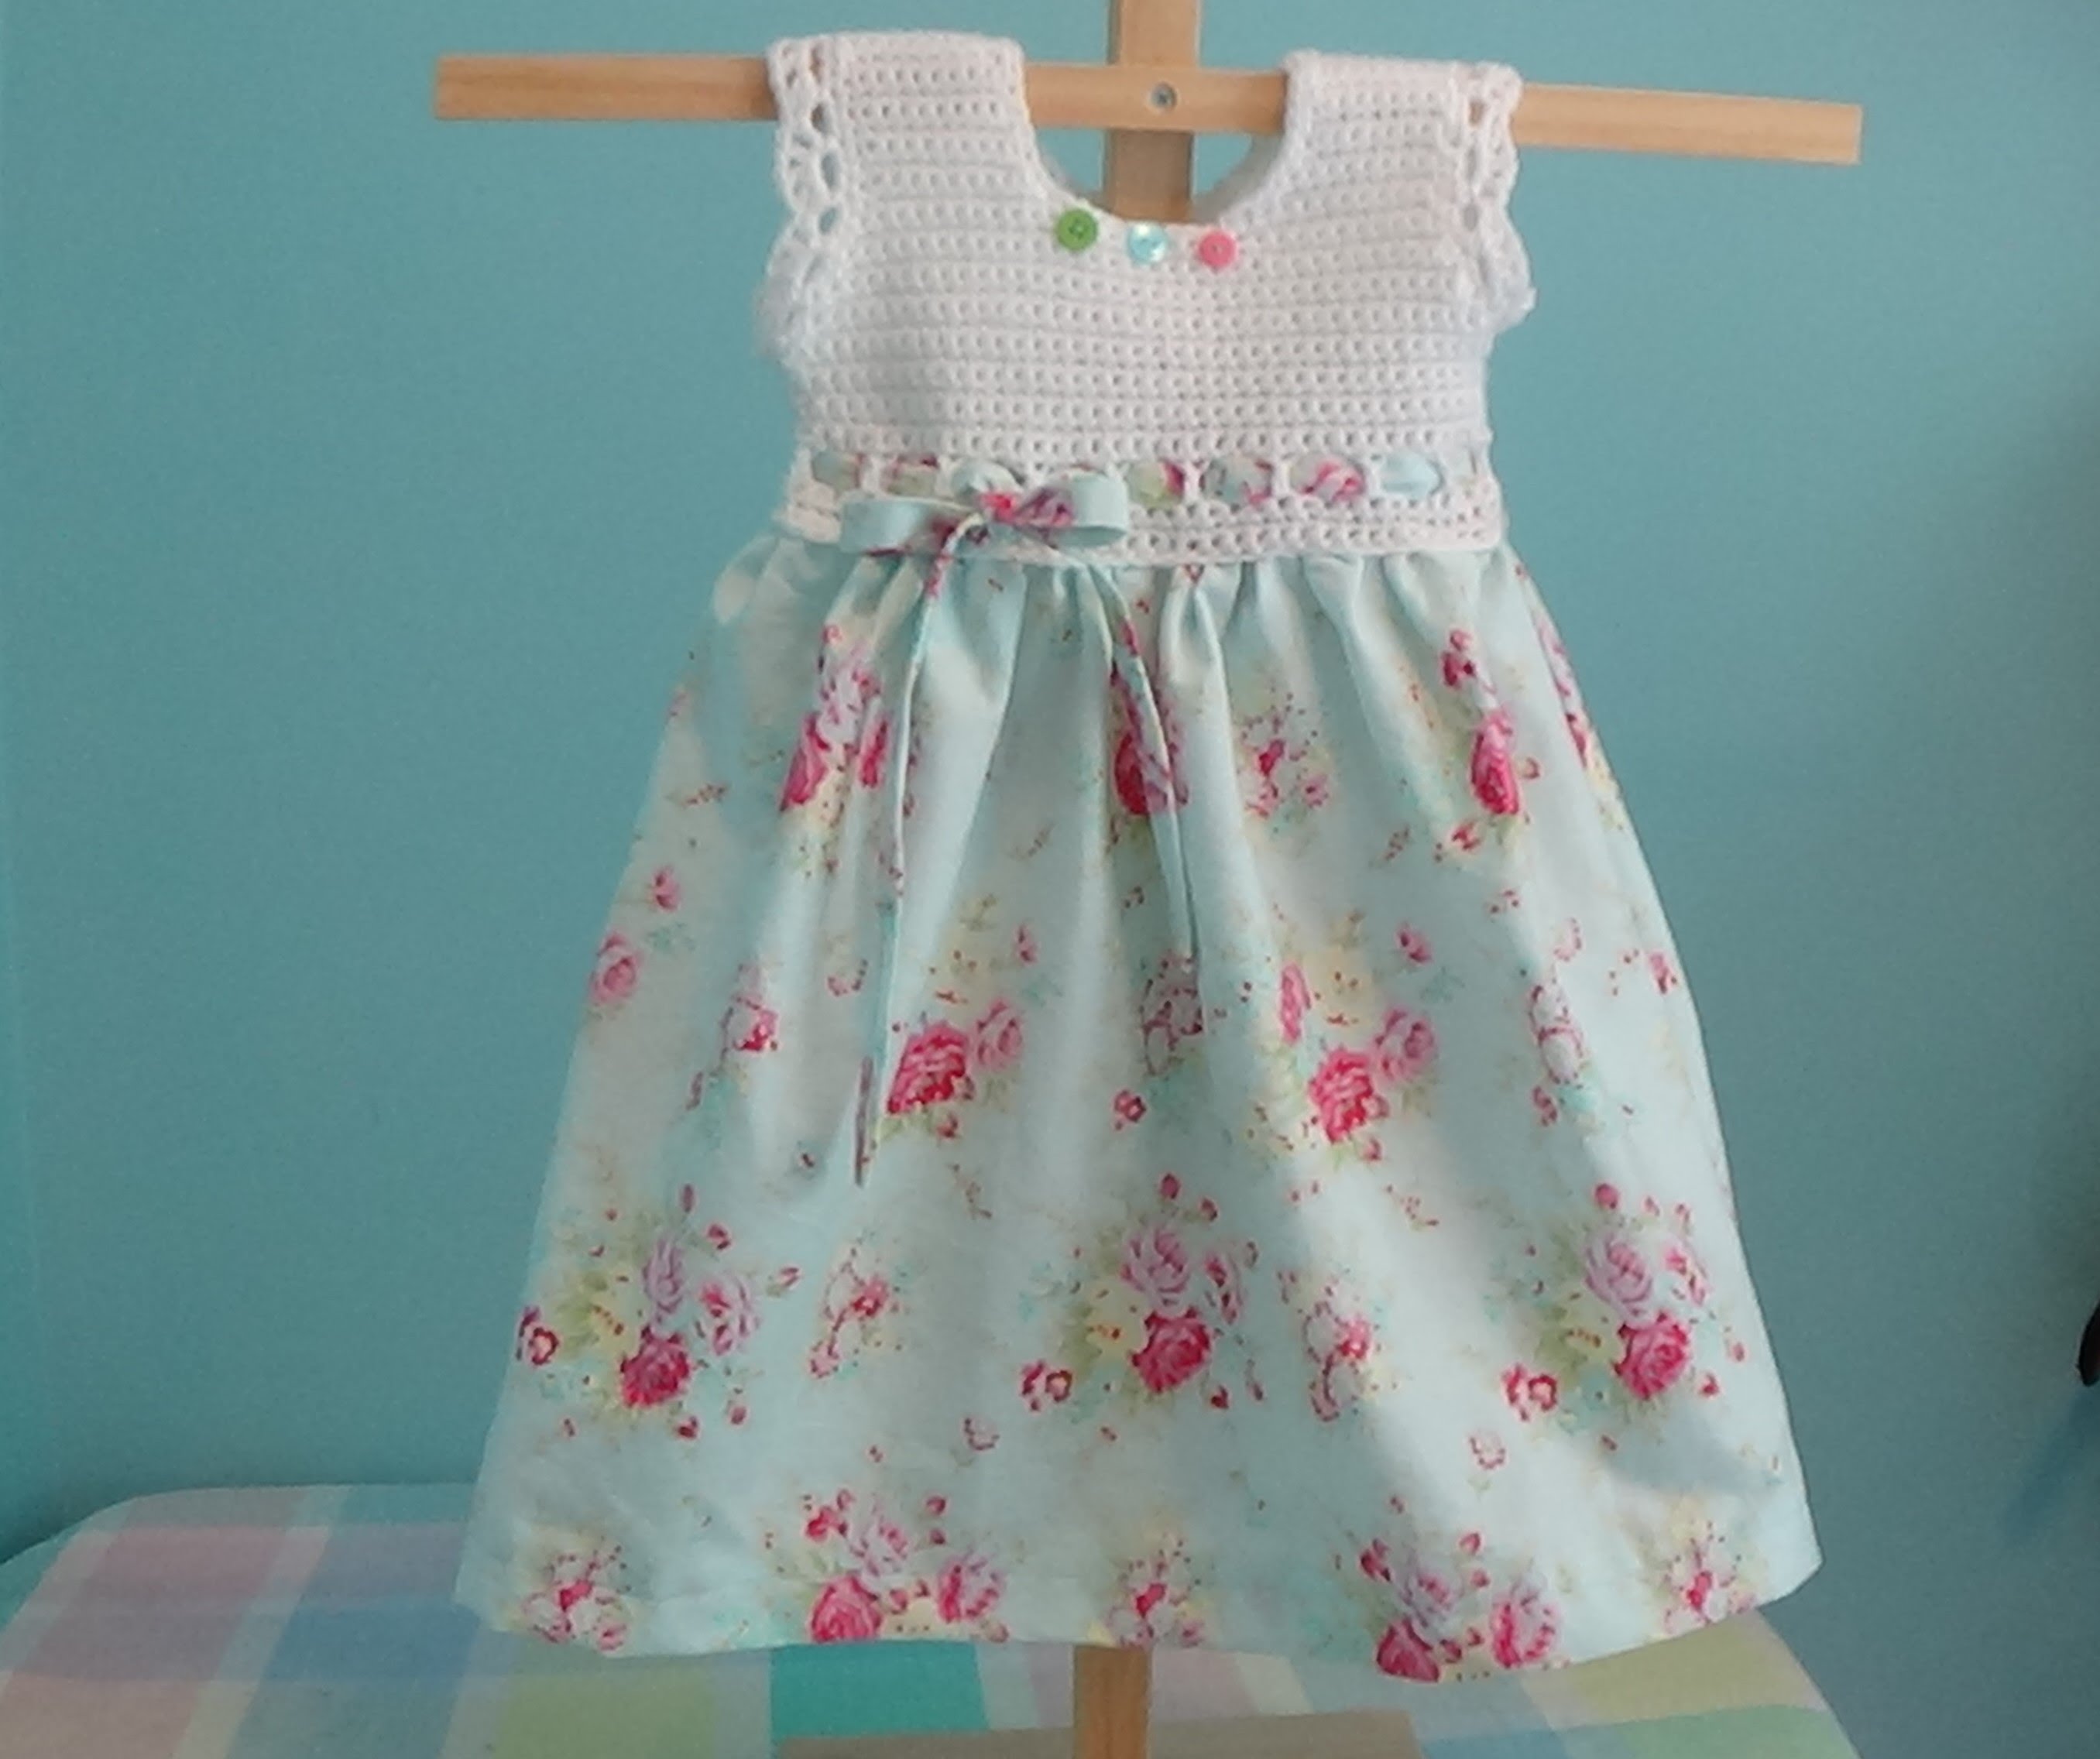 How to Crochet Baby Toddler Girl Dress using Vintage Pillow Case Pattern Tutorial (Video)